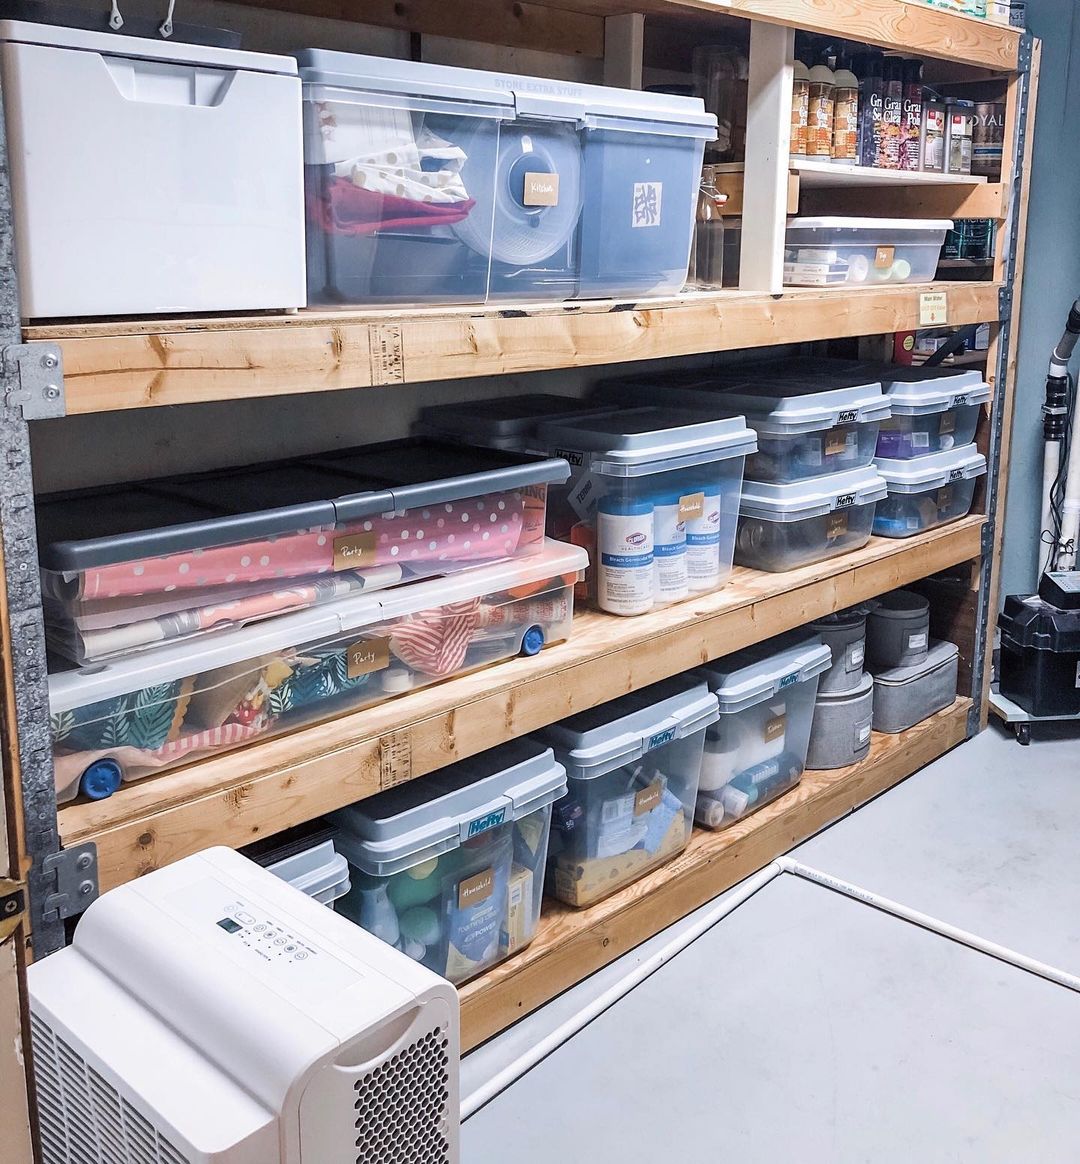 Basement Storage Space with Clear Storage Bins on Shelves. Photo by Instagram User @indianapolisneat